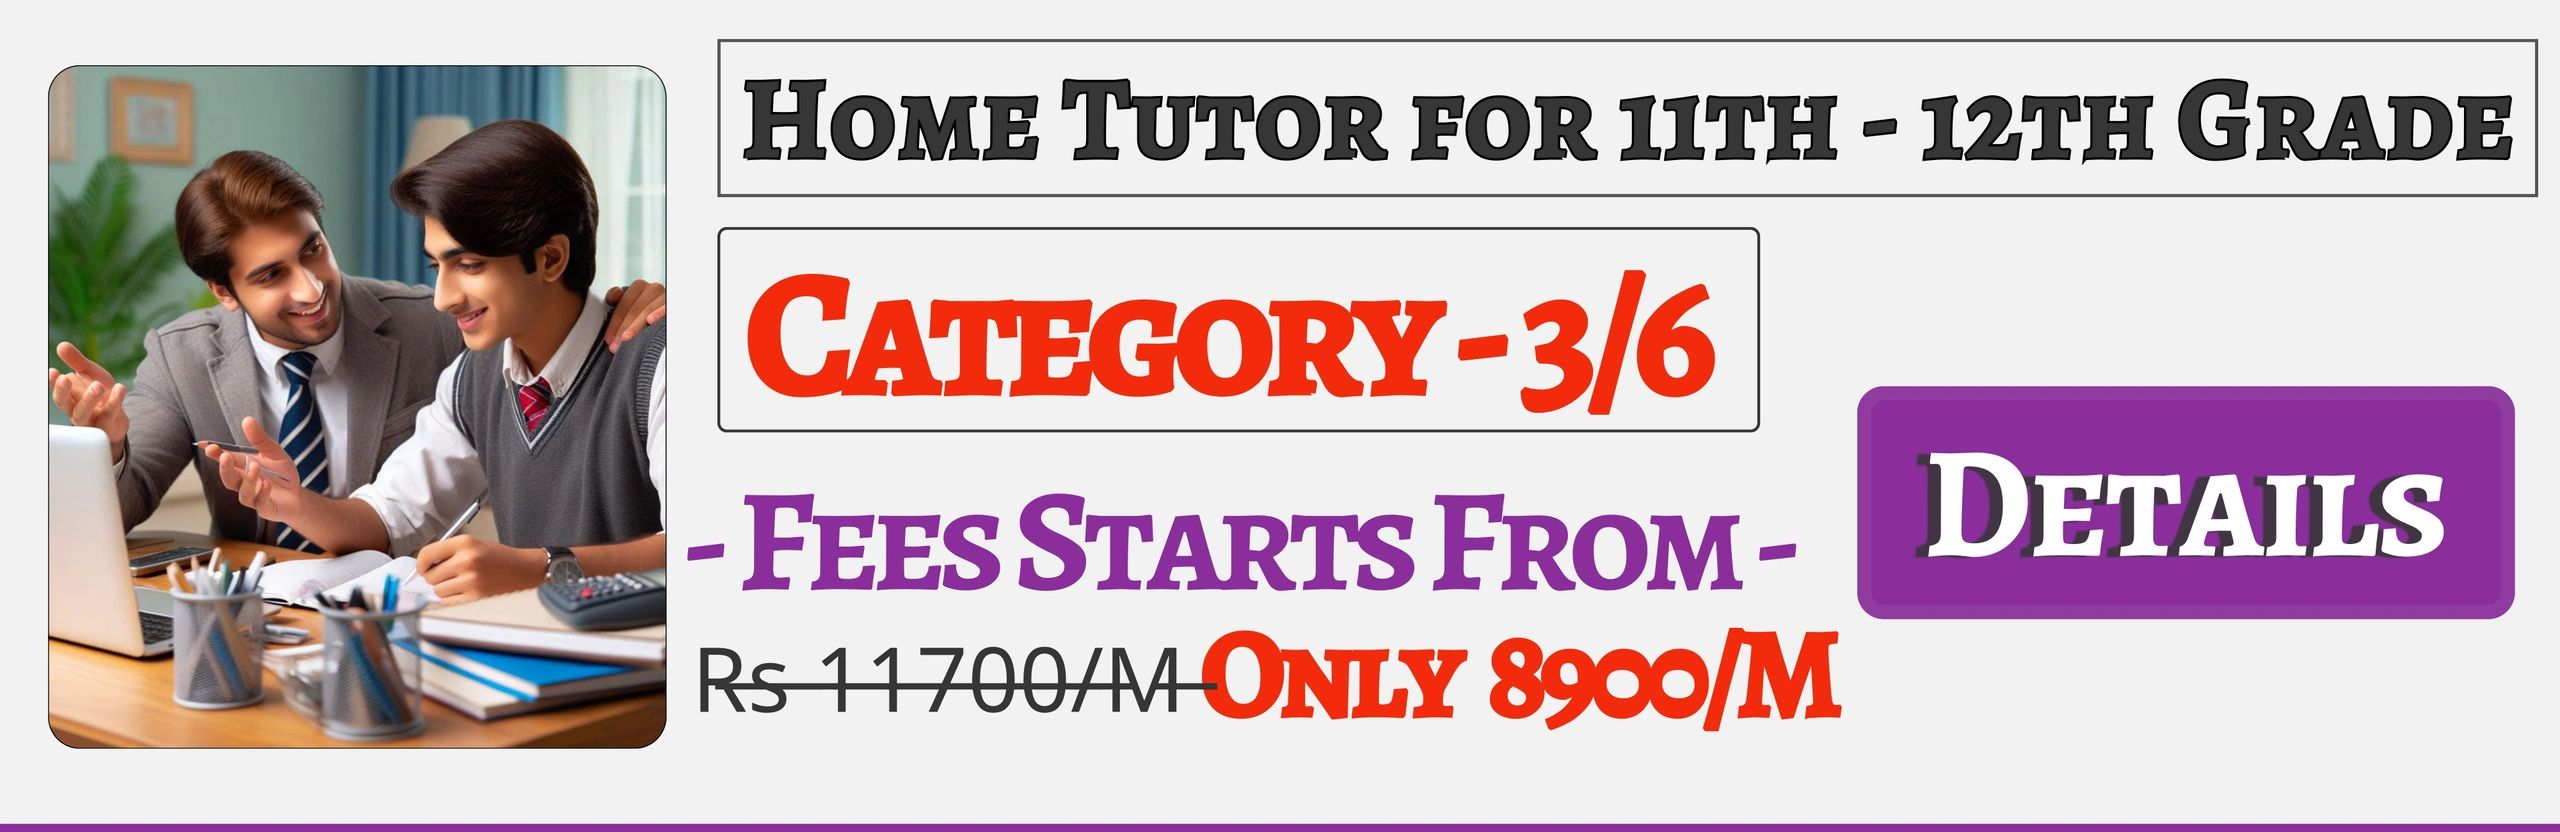 Book Best Home Tuition Tutors For 11th & 12th In Jaipur , Fees Only 8900/M